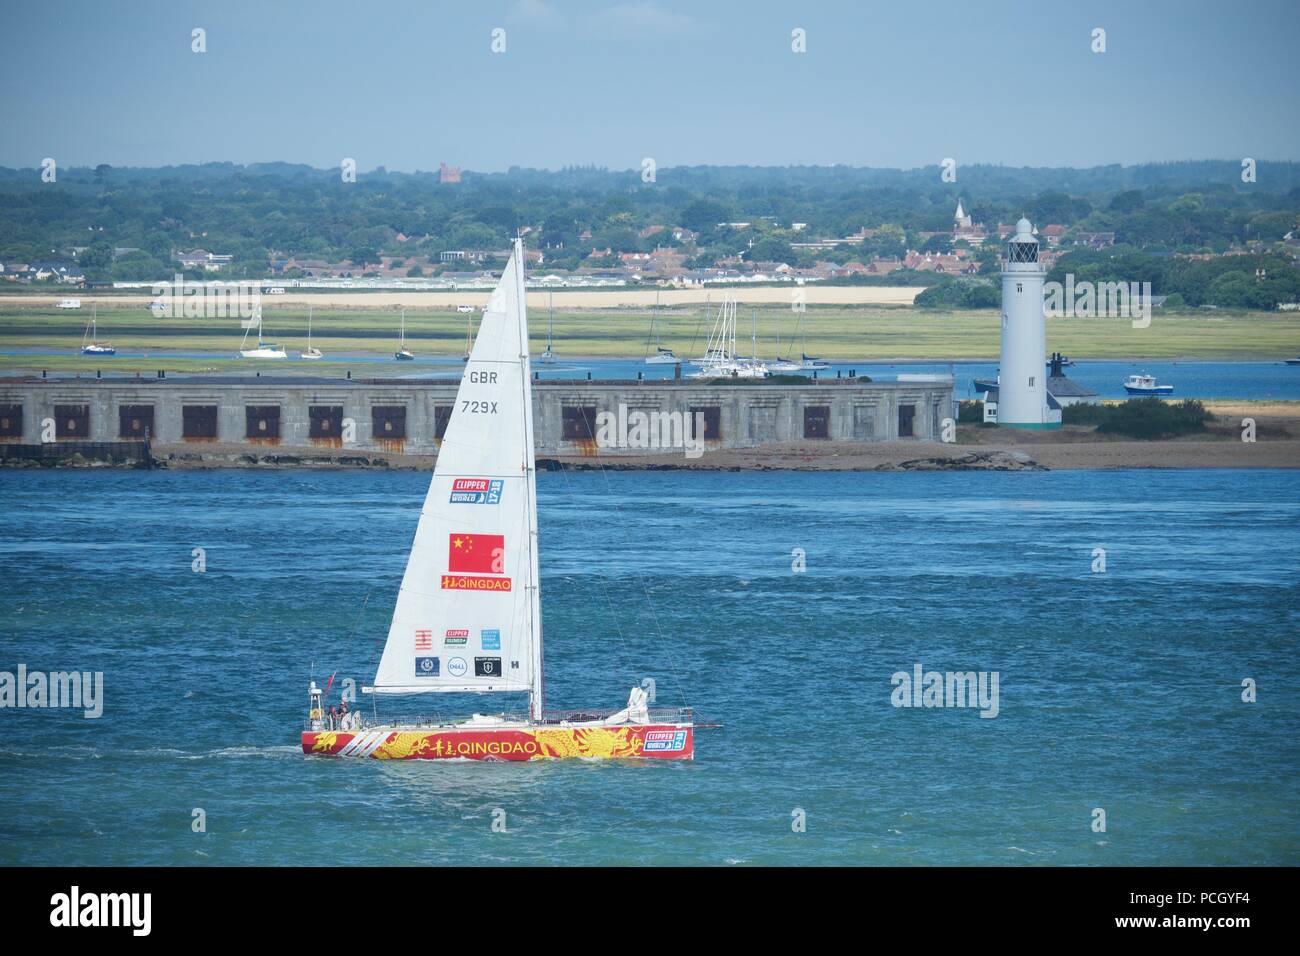 Qingdao GBR 729X Sailing up the Solent to Cowes for Lendy Cowes Week 2018 Stock Photo